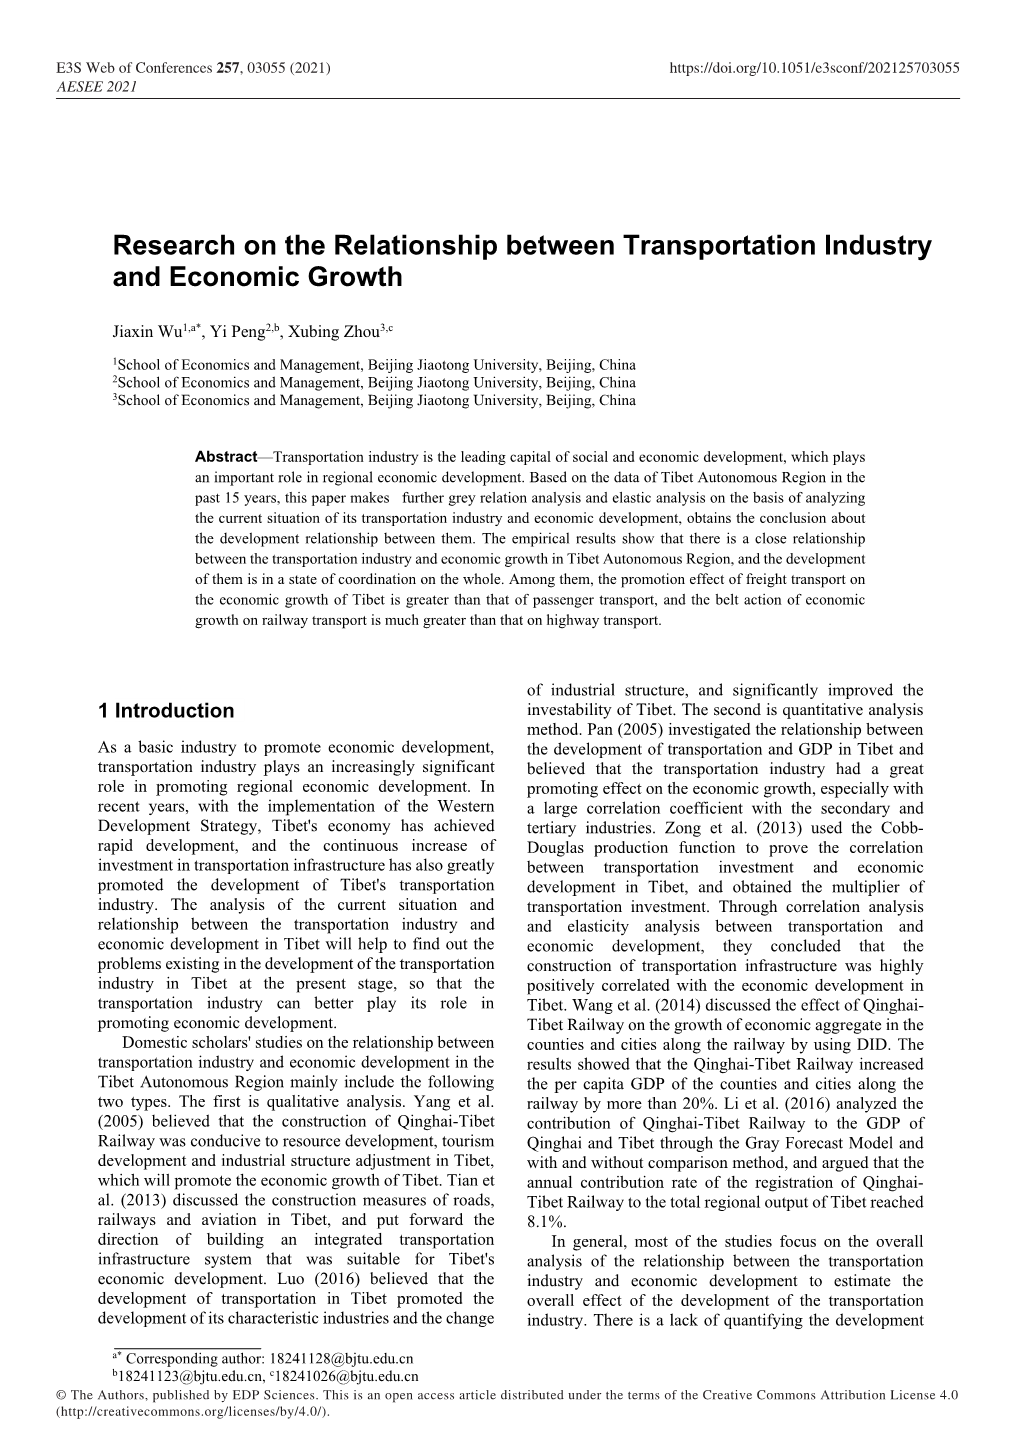 Research on the Relationship Between Transportation Industry and Economic Growth